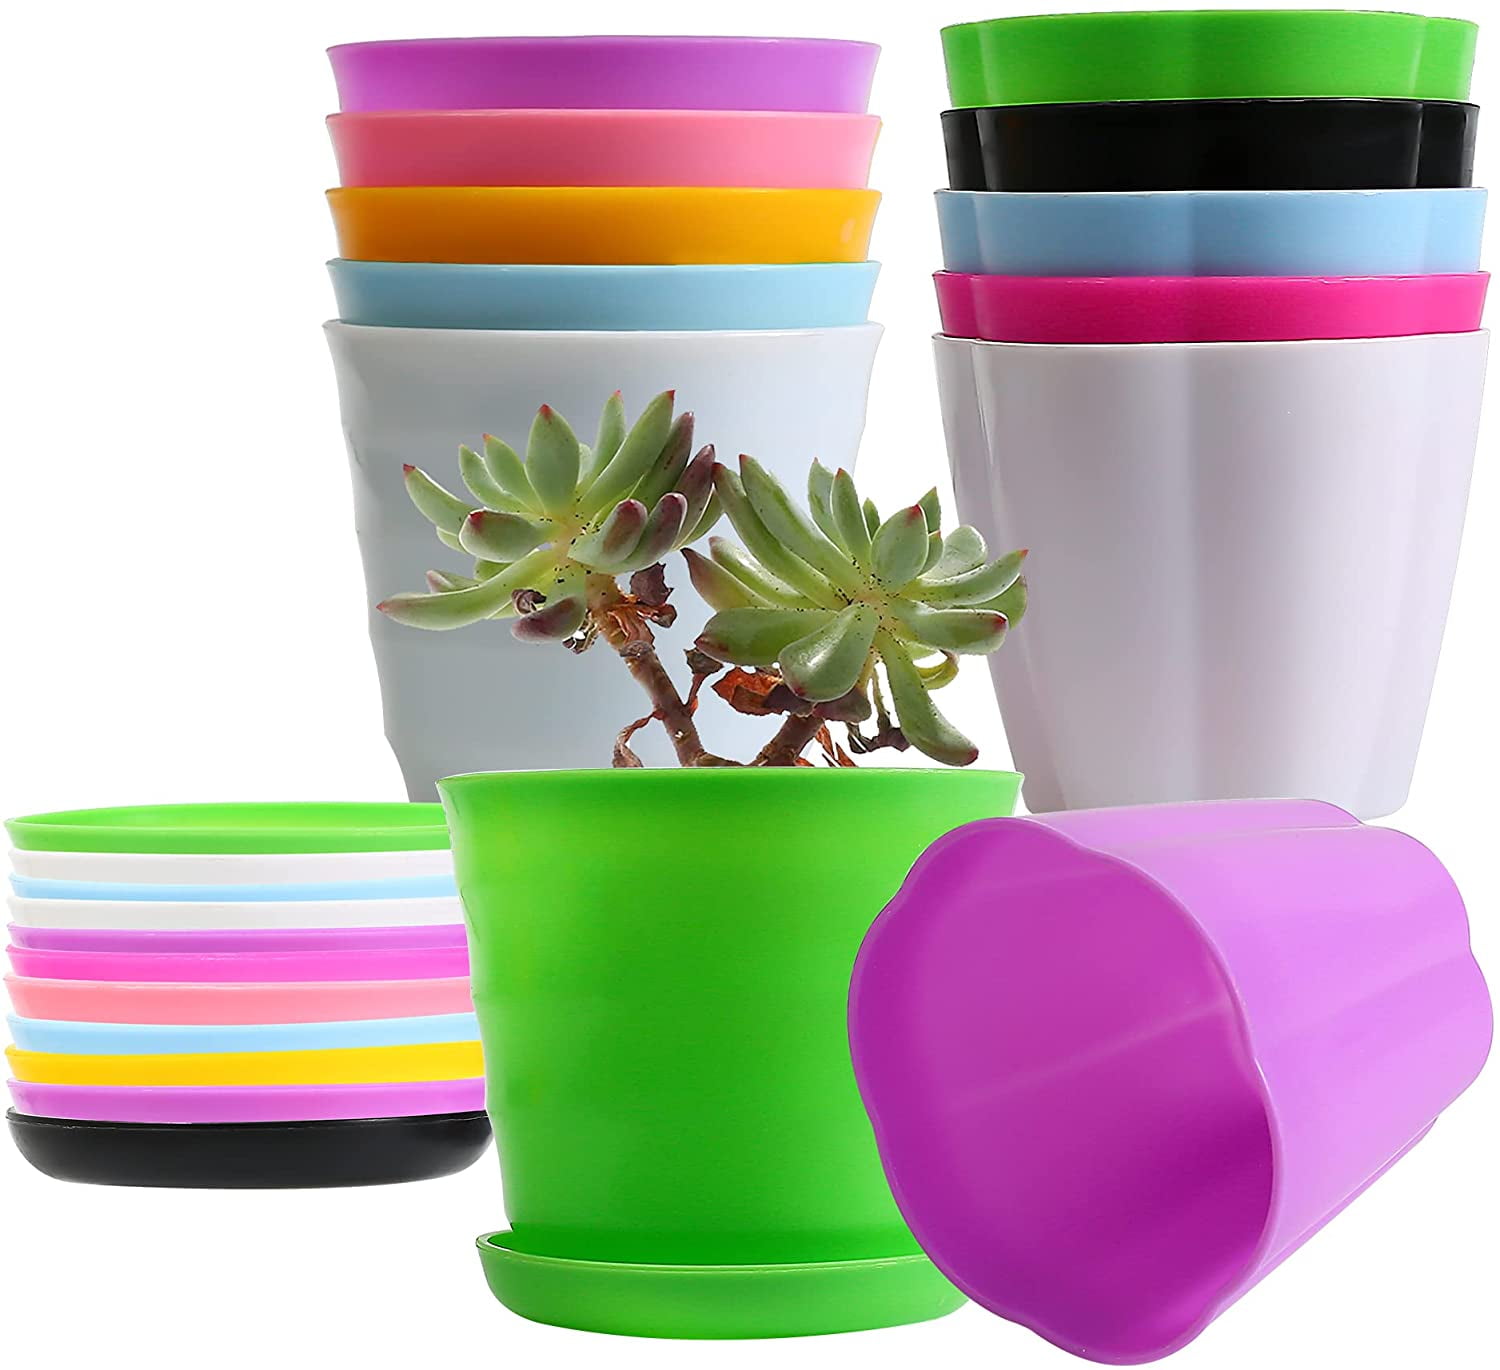 Dream Lifestyle Colorful Petal Plastic Plant Pot,Multiple Model Flower Pot  with Tray Saucer for Decoration of Home,Office,Desk,Garden,Flower  Shop,Gardening Containers 1PC - Walmart.com